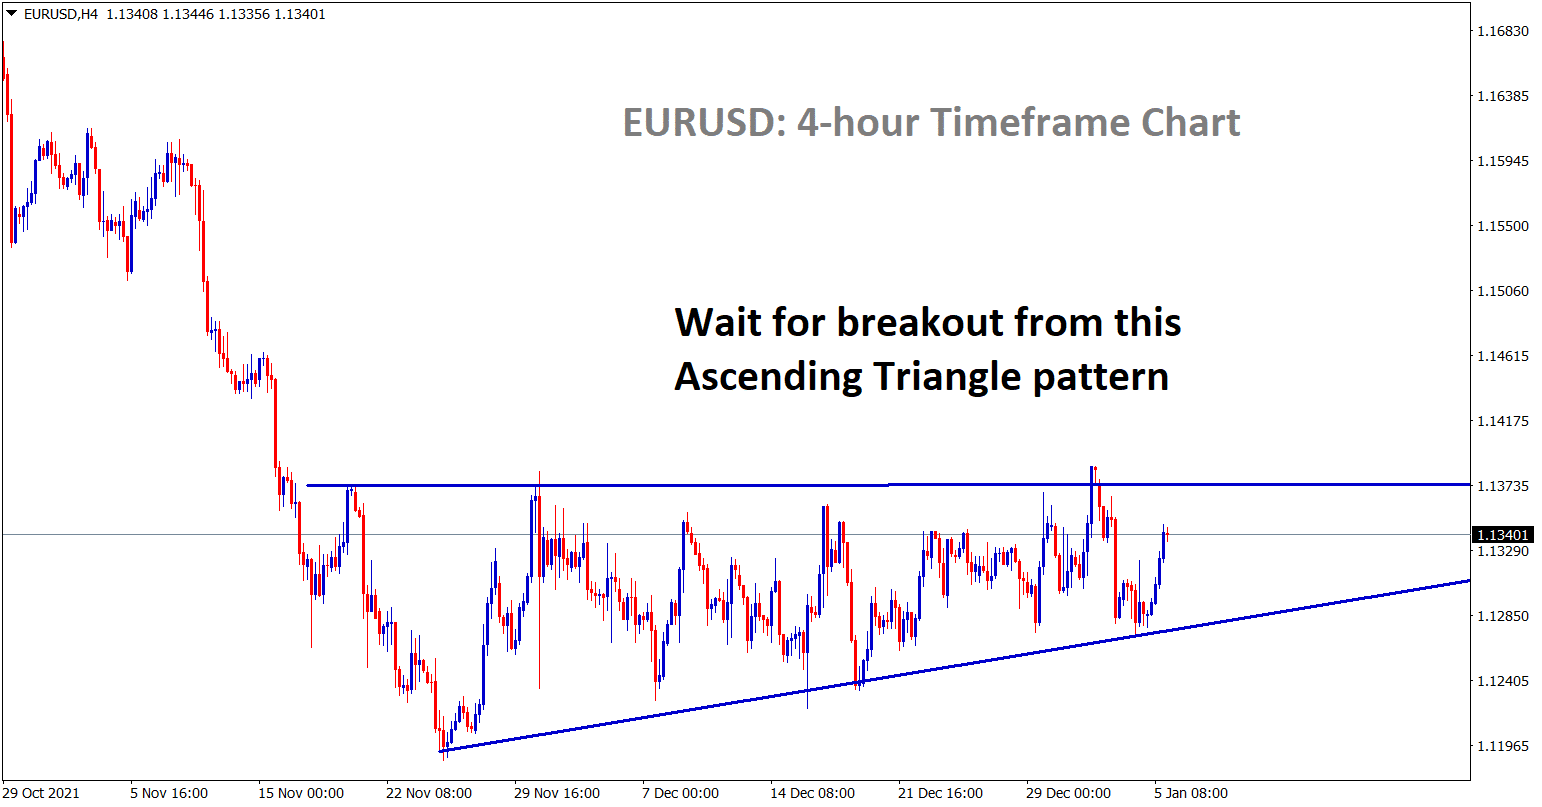 EURUSD waiting for Ascending triangle breakout pattern